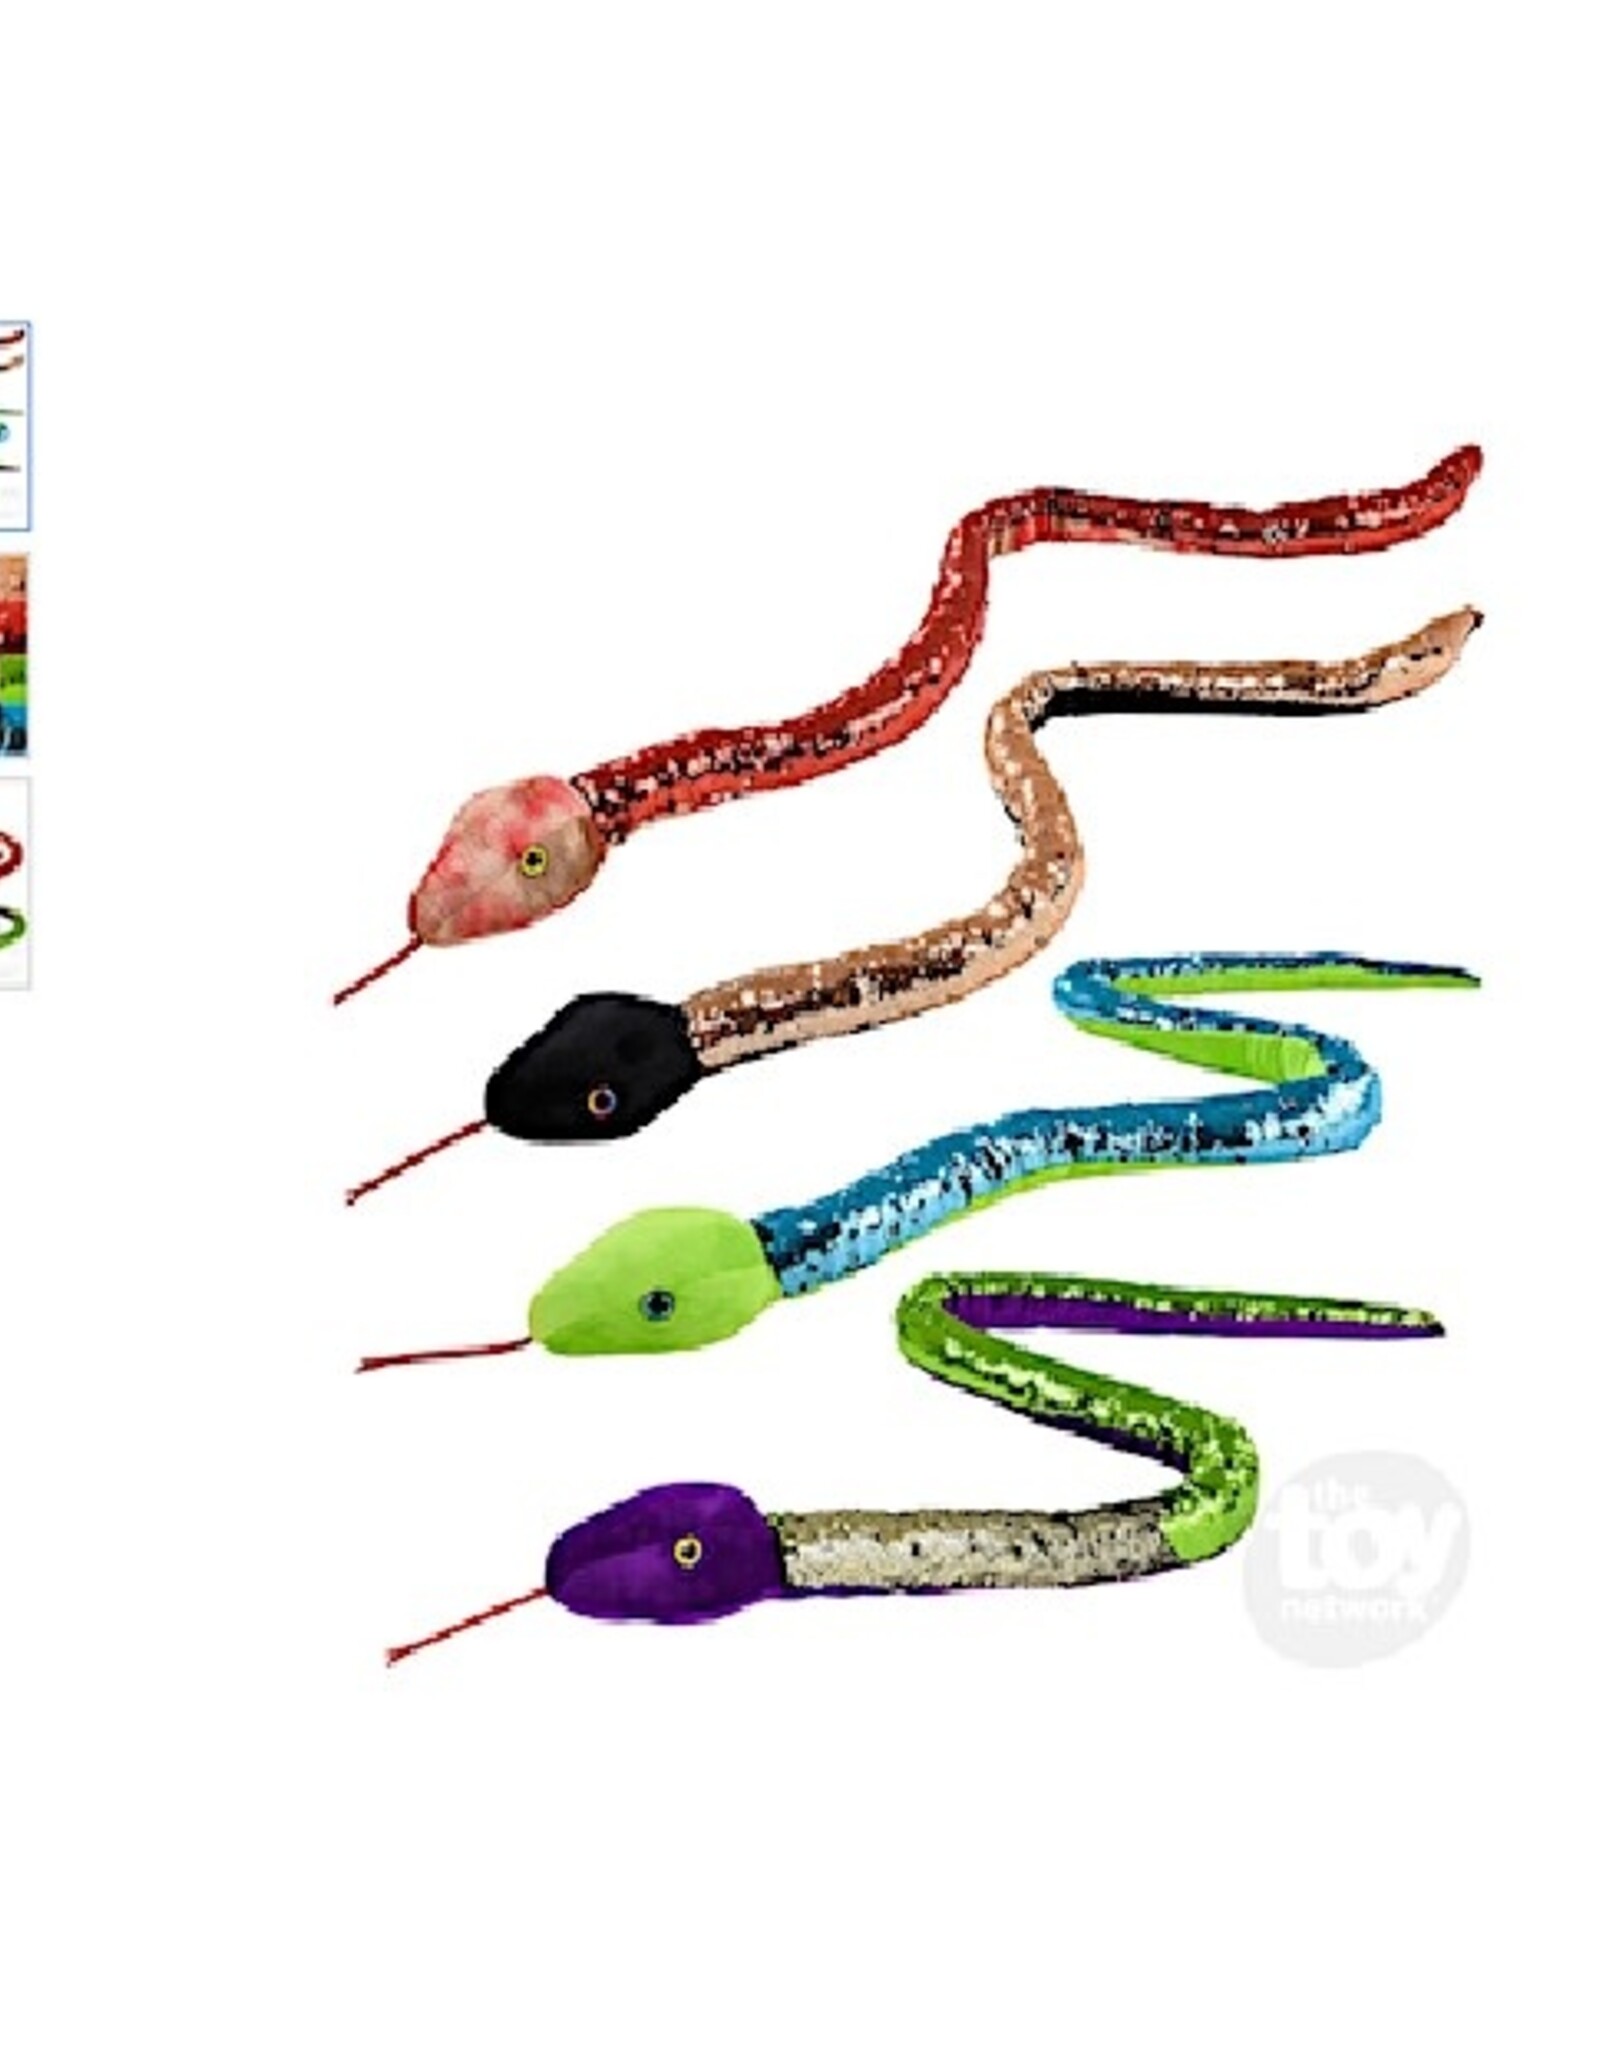 The Toy Network Sequin Snakes 67 inch